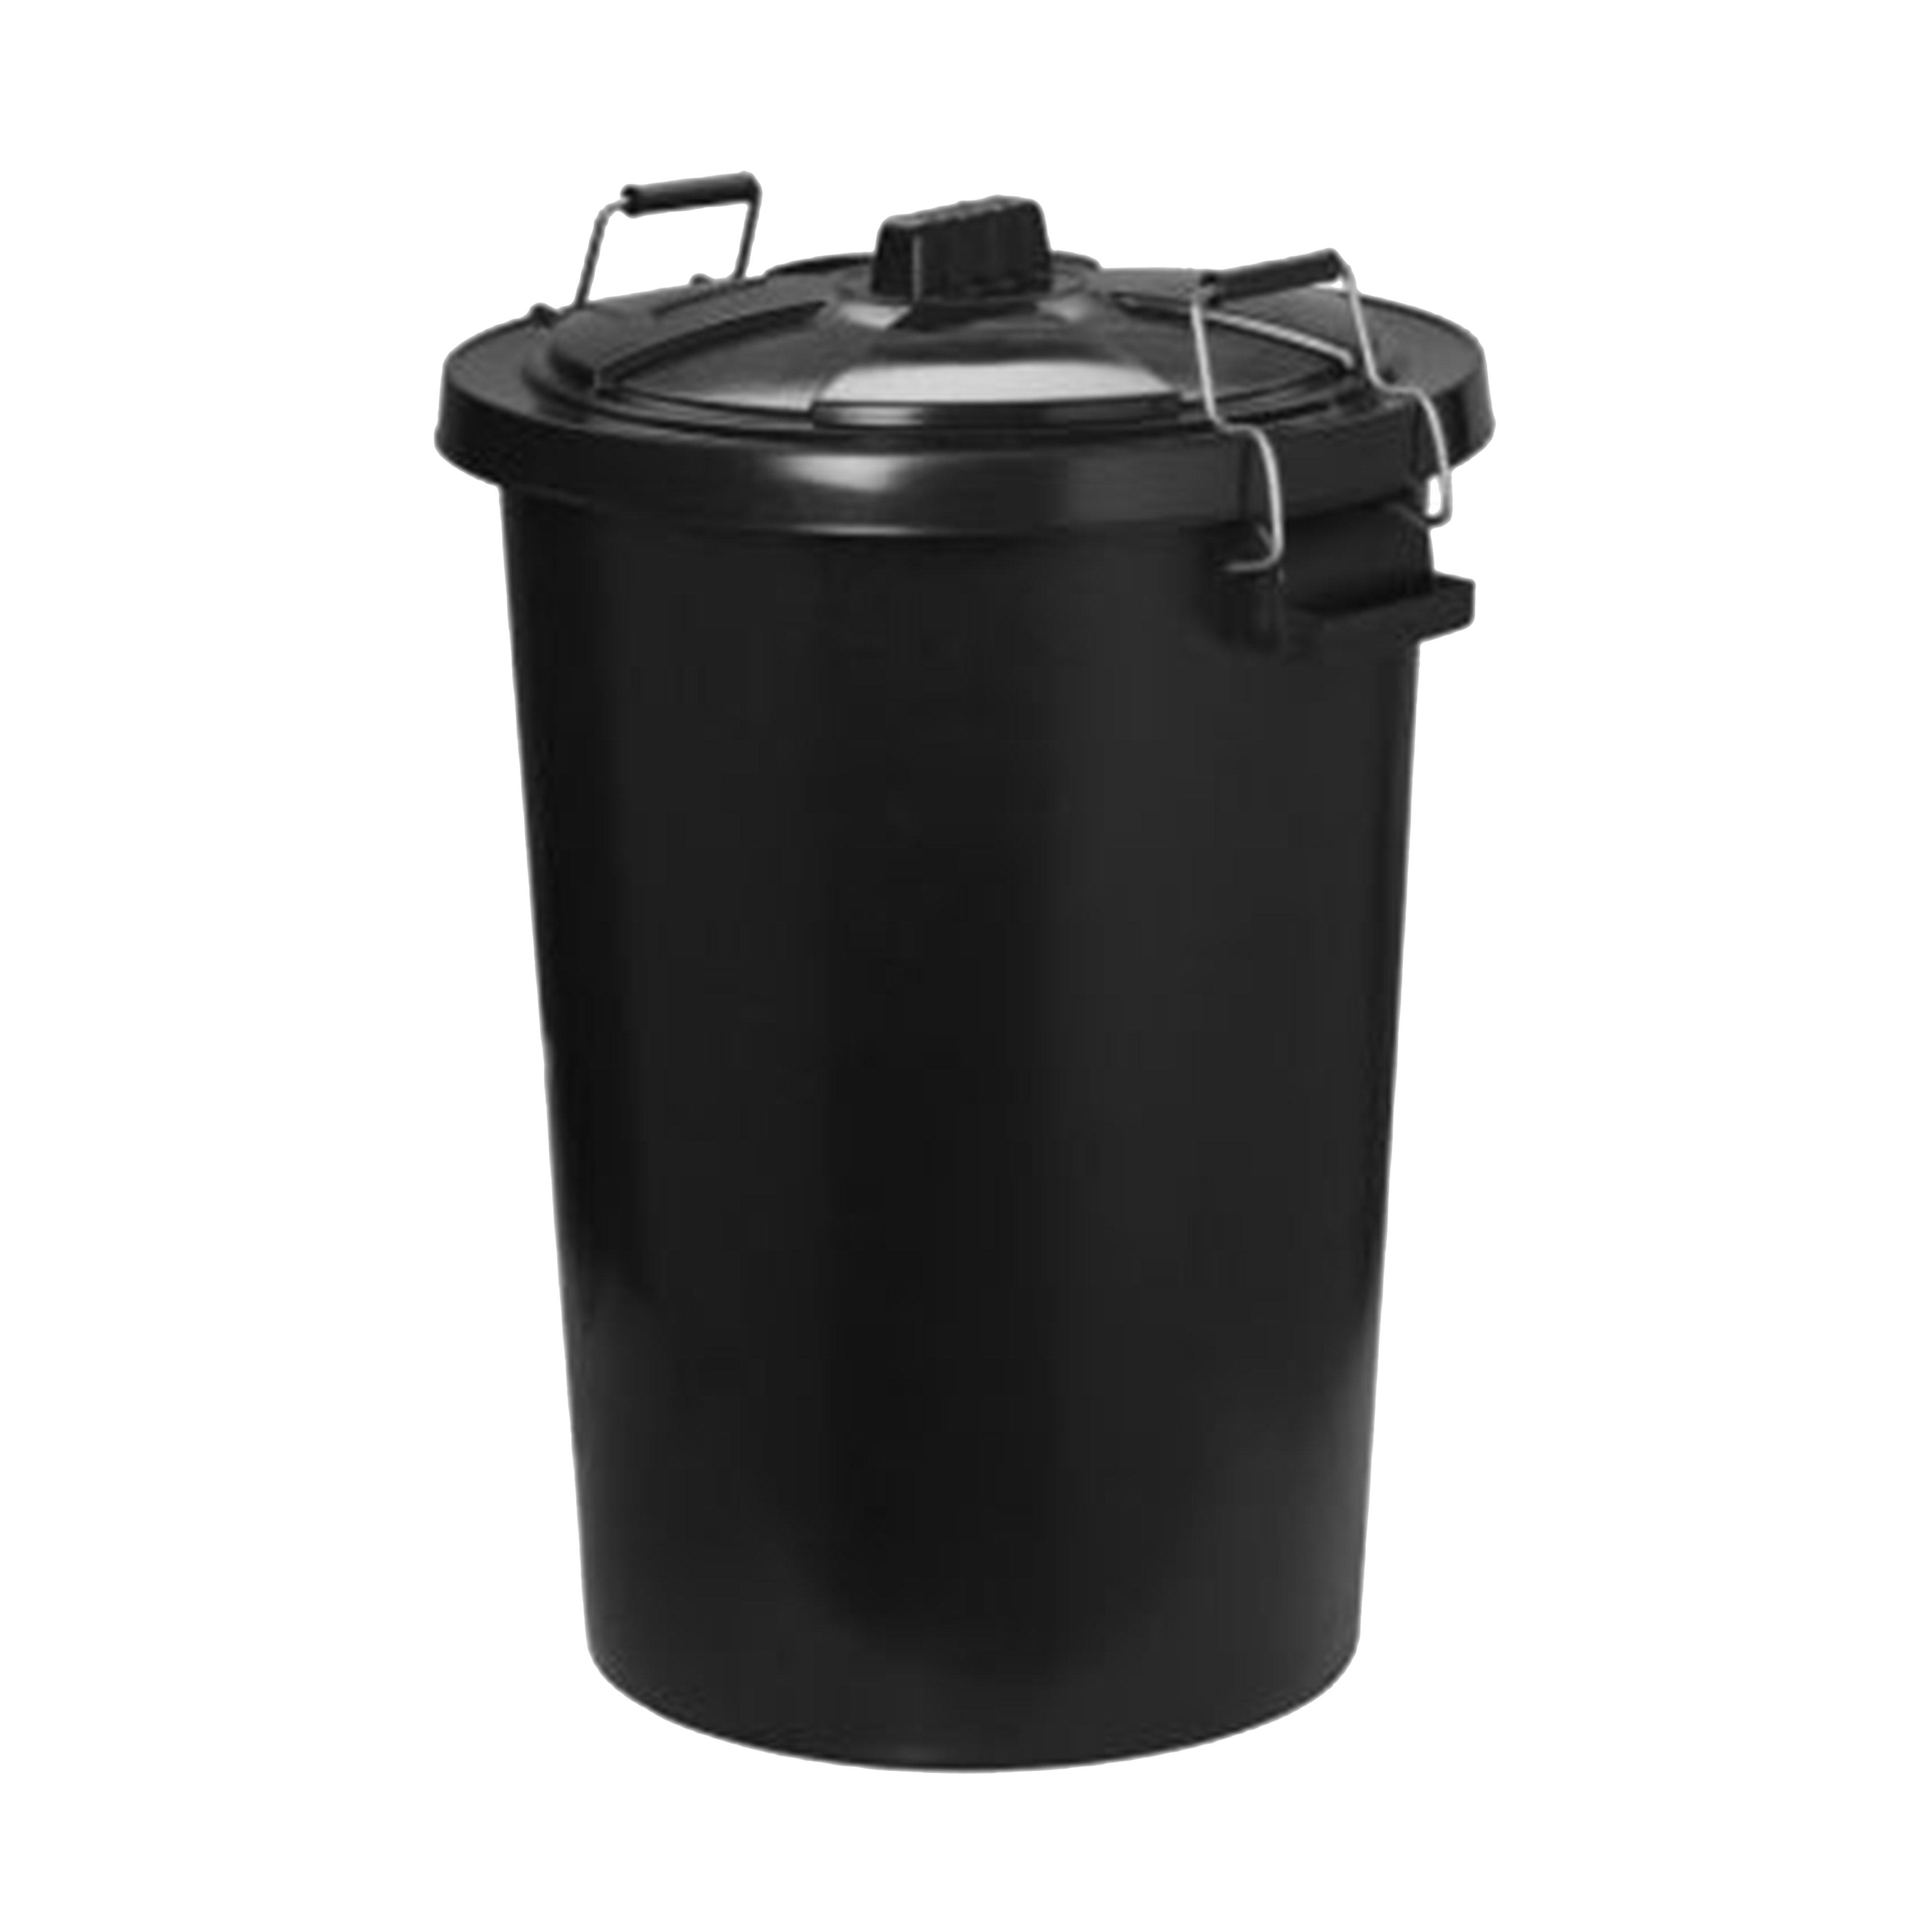 Dustbin and Lid Black